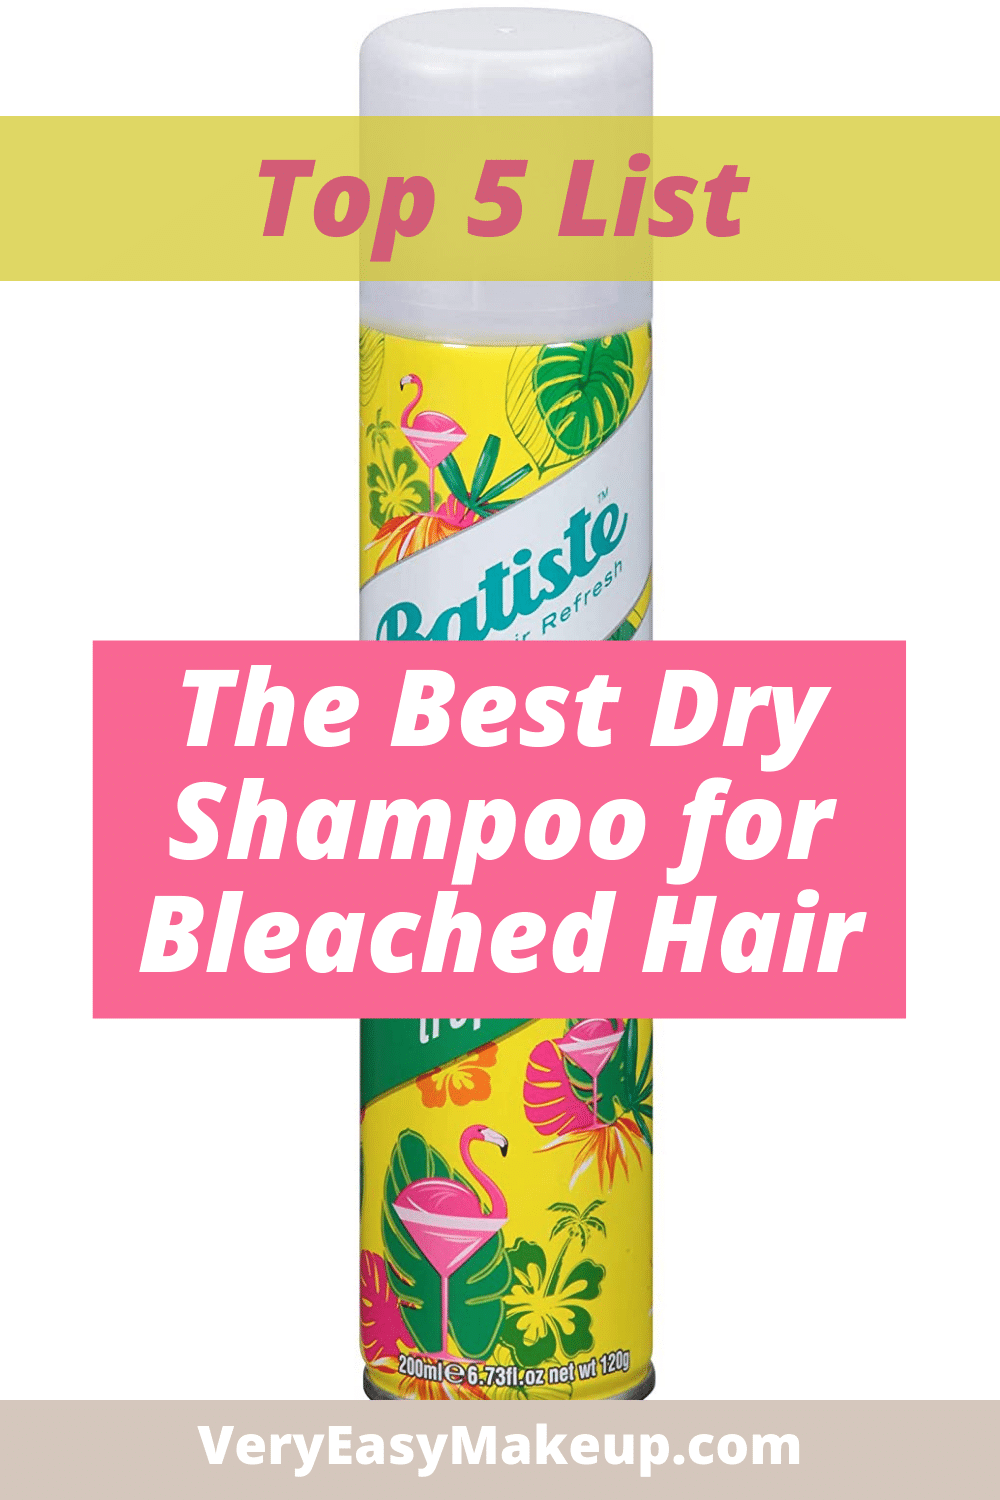 The Best Dry Shampoo for Bleached Hair by Very Easy Makeup